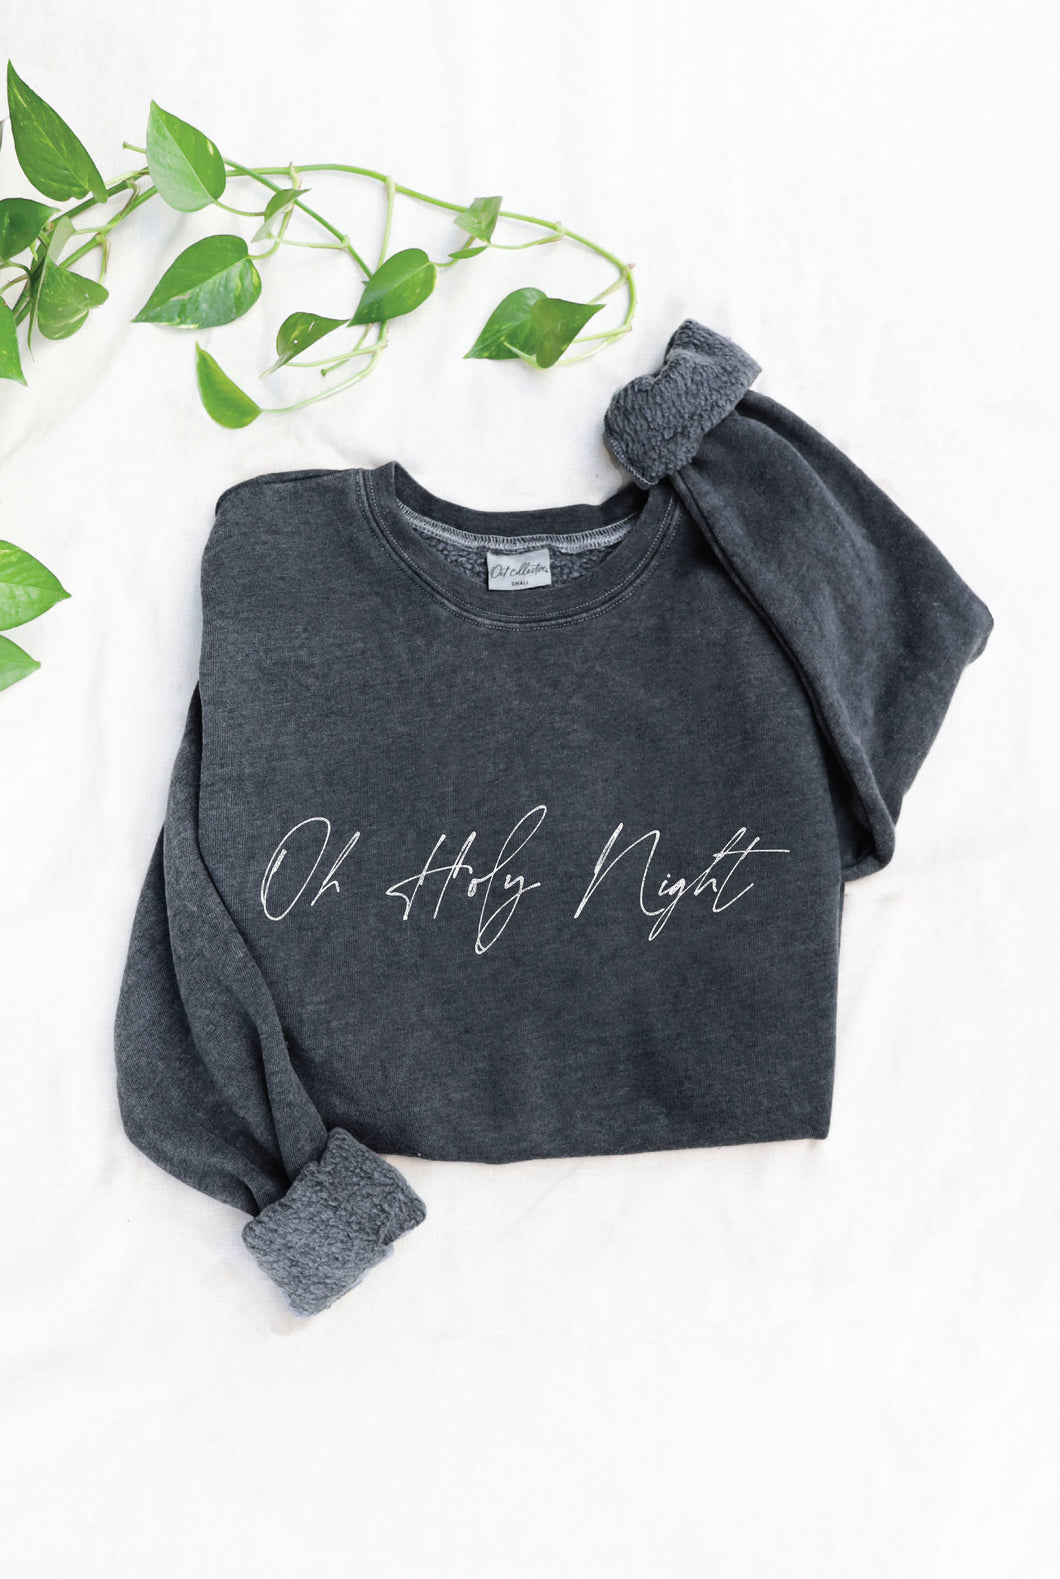 OH HOLY NIGHT Mineral Graphic Sweatshirt